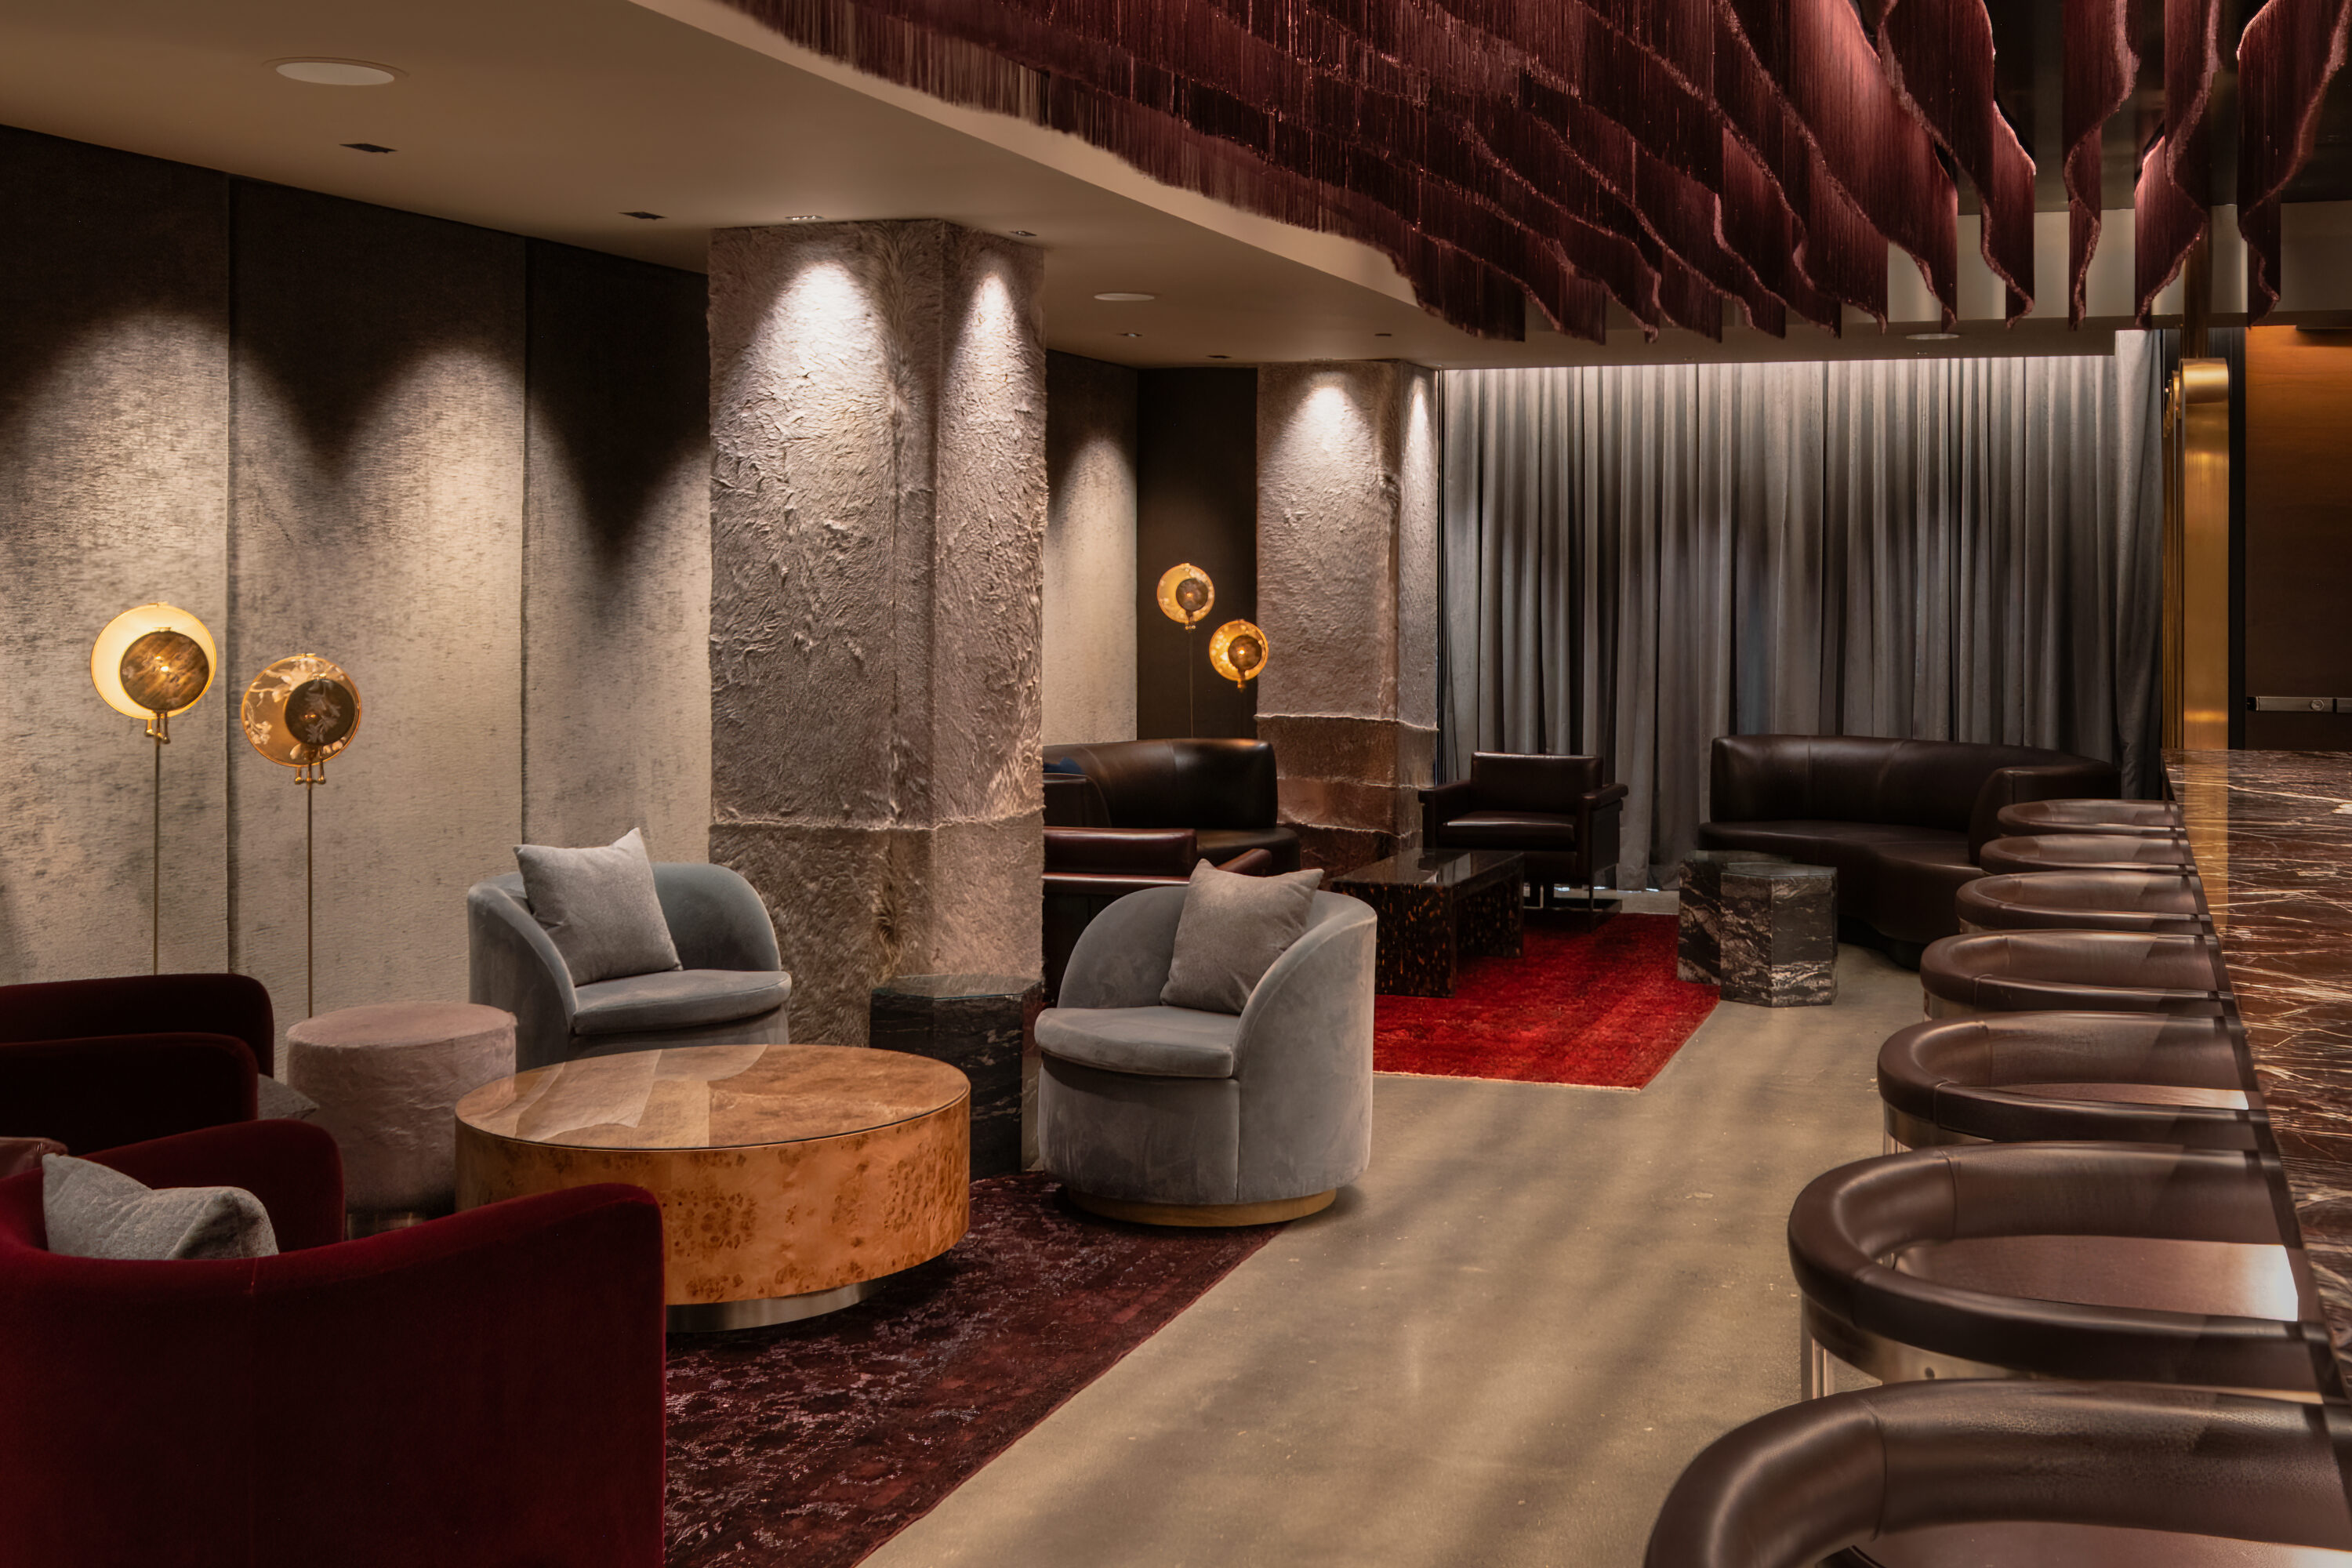 Four Walls - an intimate cocktail bar within The Joseph, a Luxury Collection Hotel, Nashville